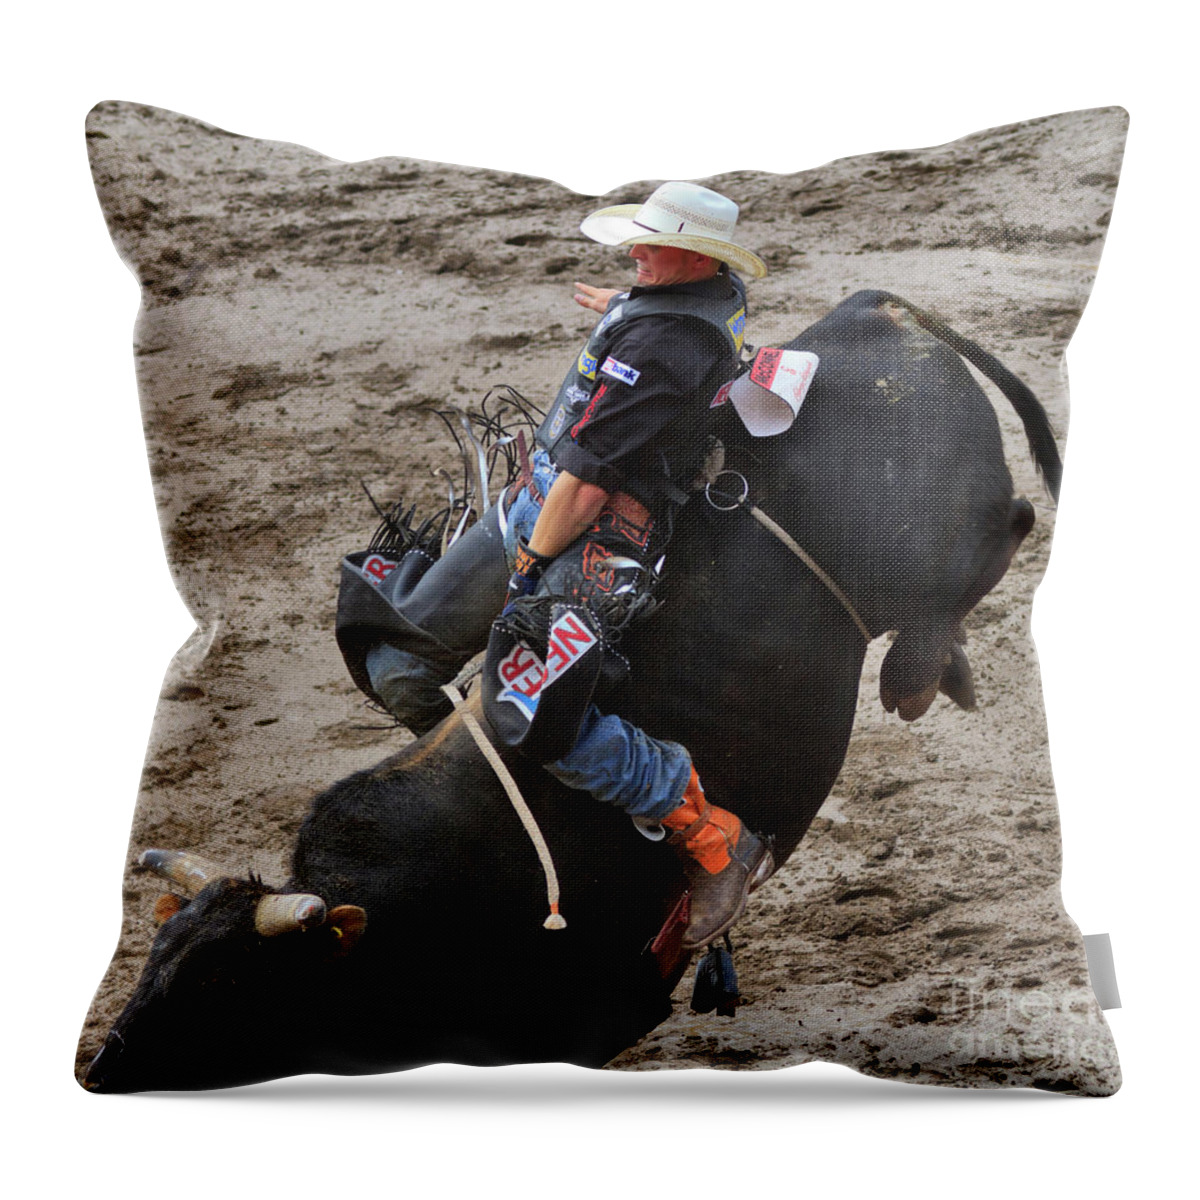 Tough Throw Pillow featuring the photograph Bull Riding by Louise Heusinkveld